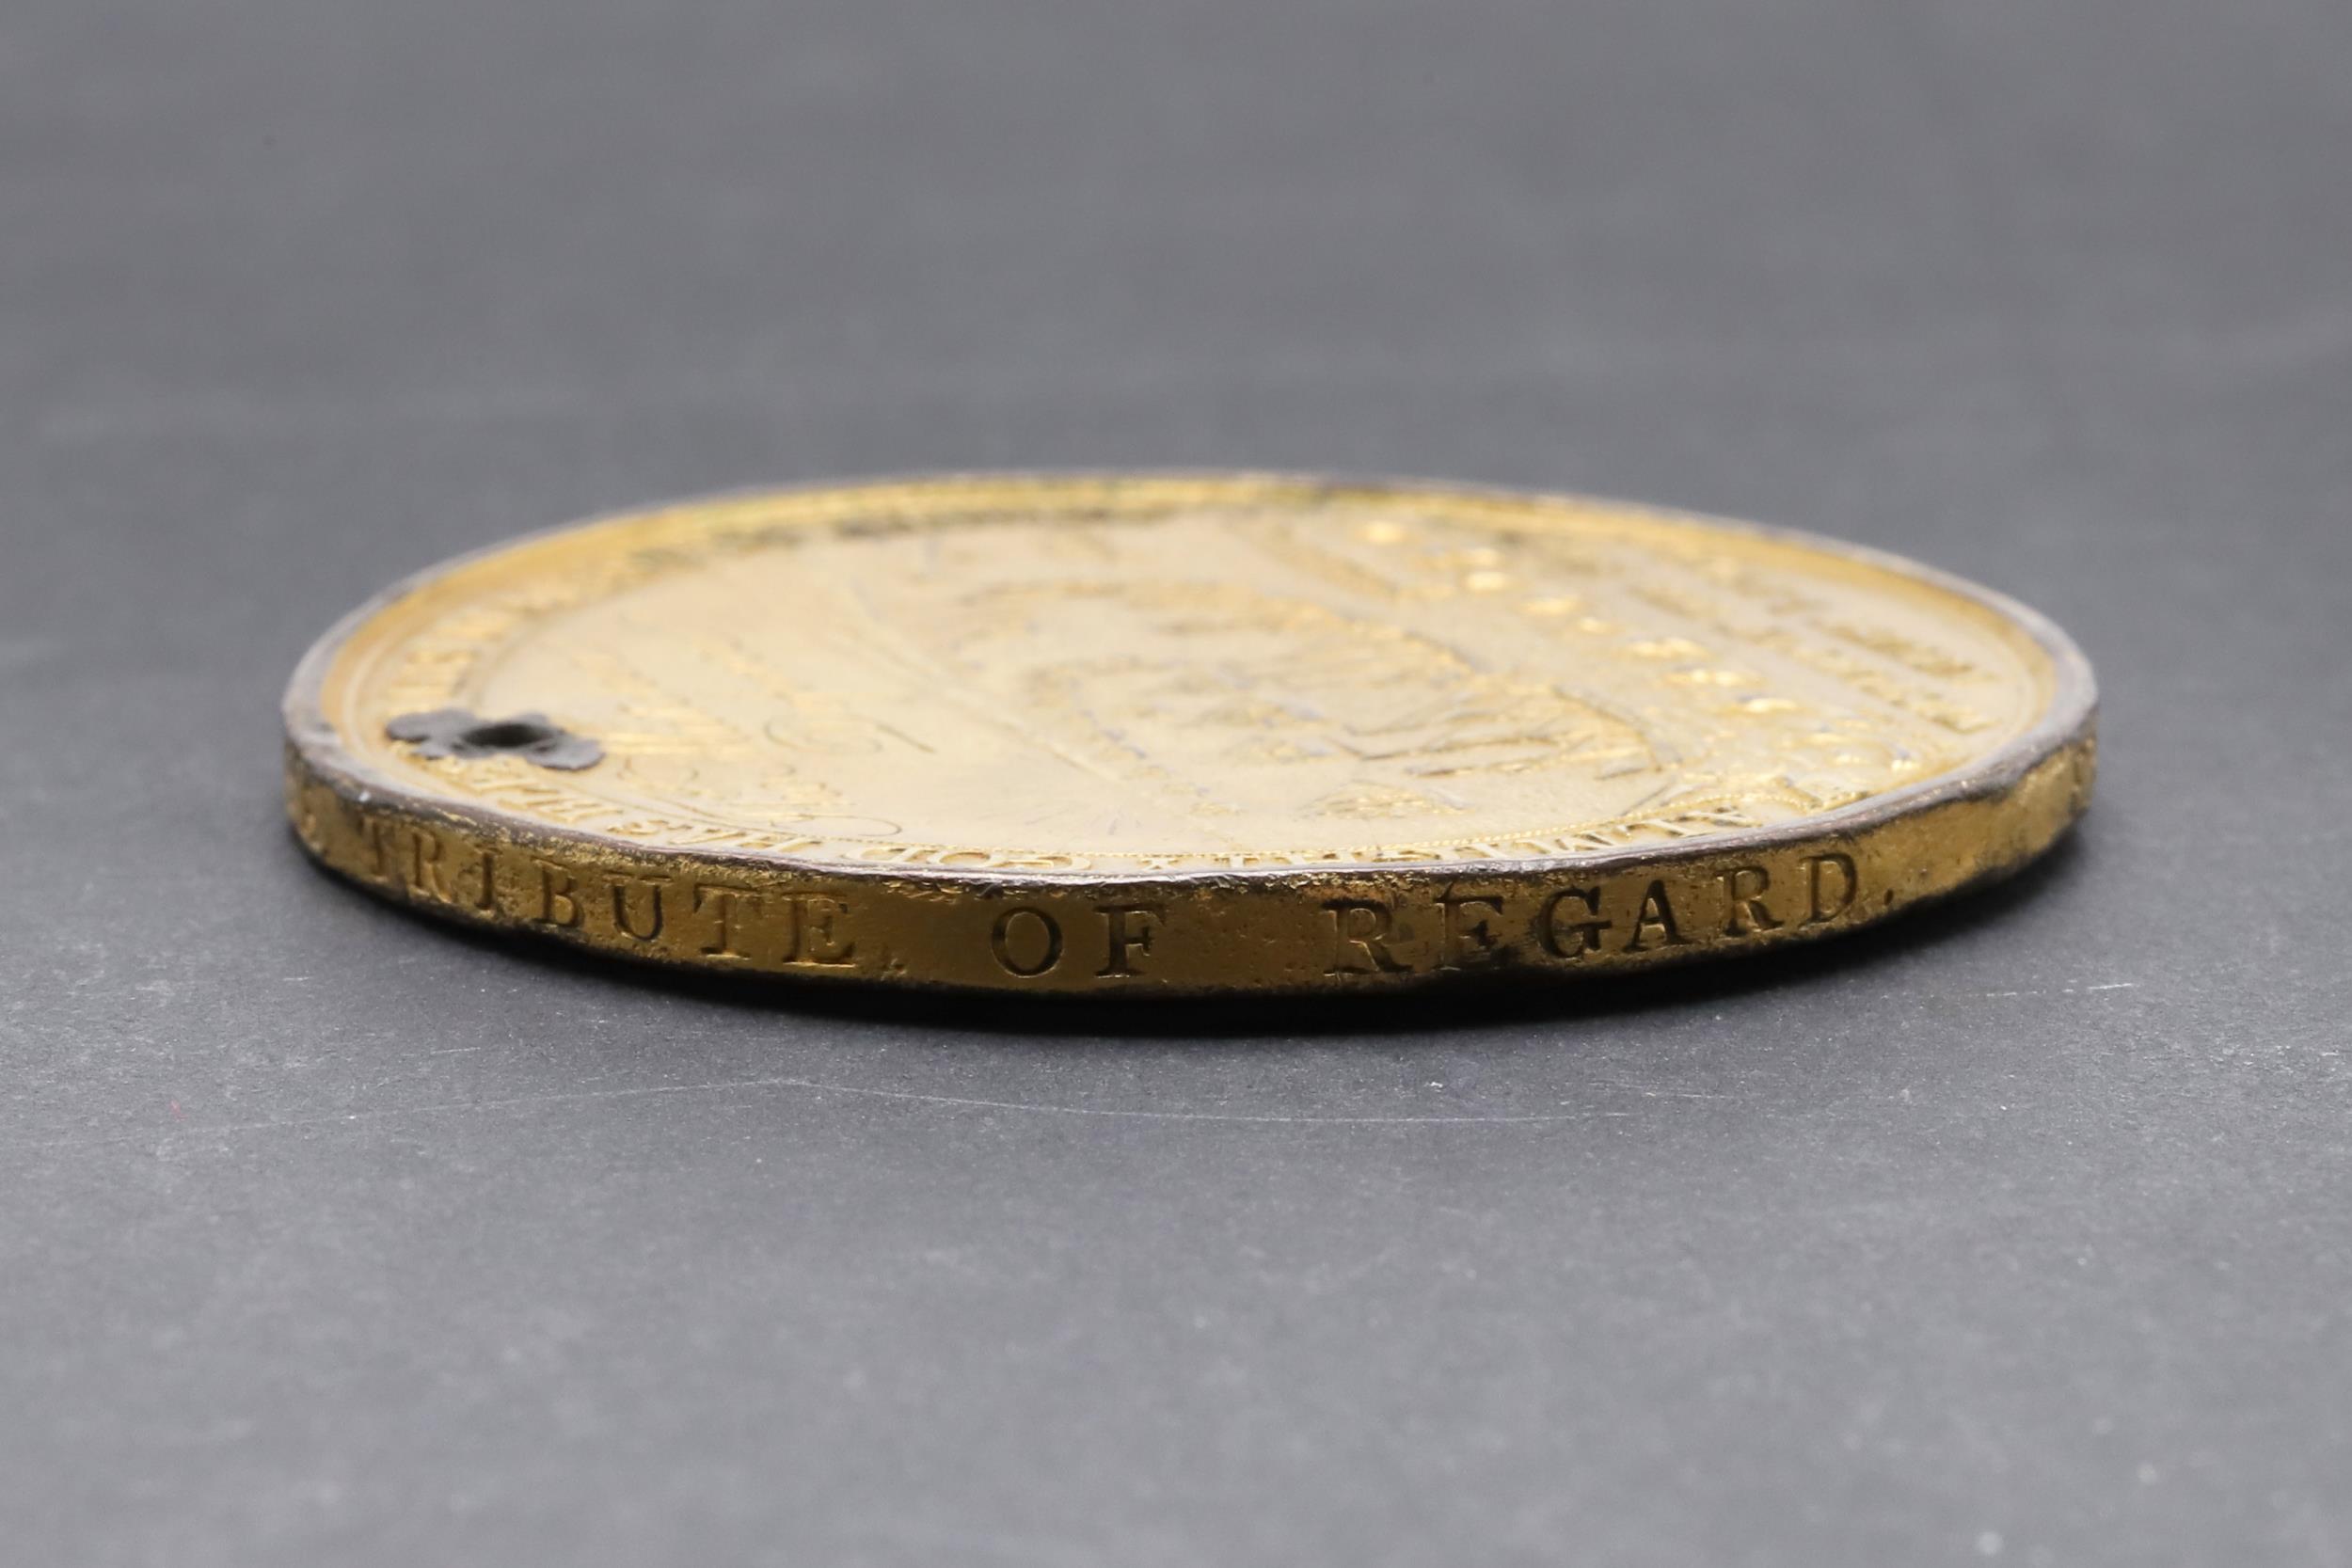 DAVISON'S MEDAL FOR THE BATTLE OF THE NILE, 1798, AWARDED TO THOMAS MATCHER, DEFENCE. - Image 5 of 5